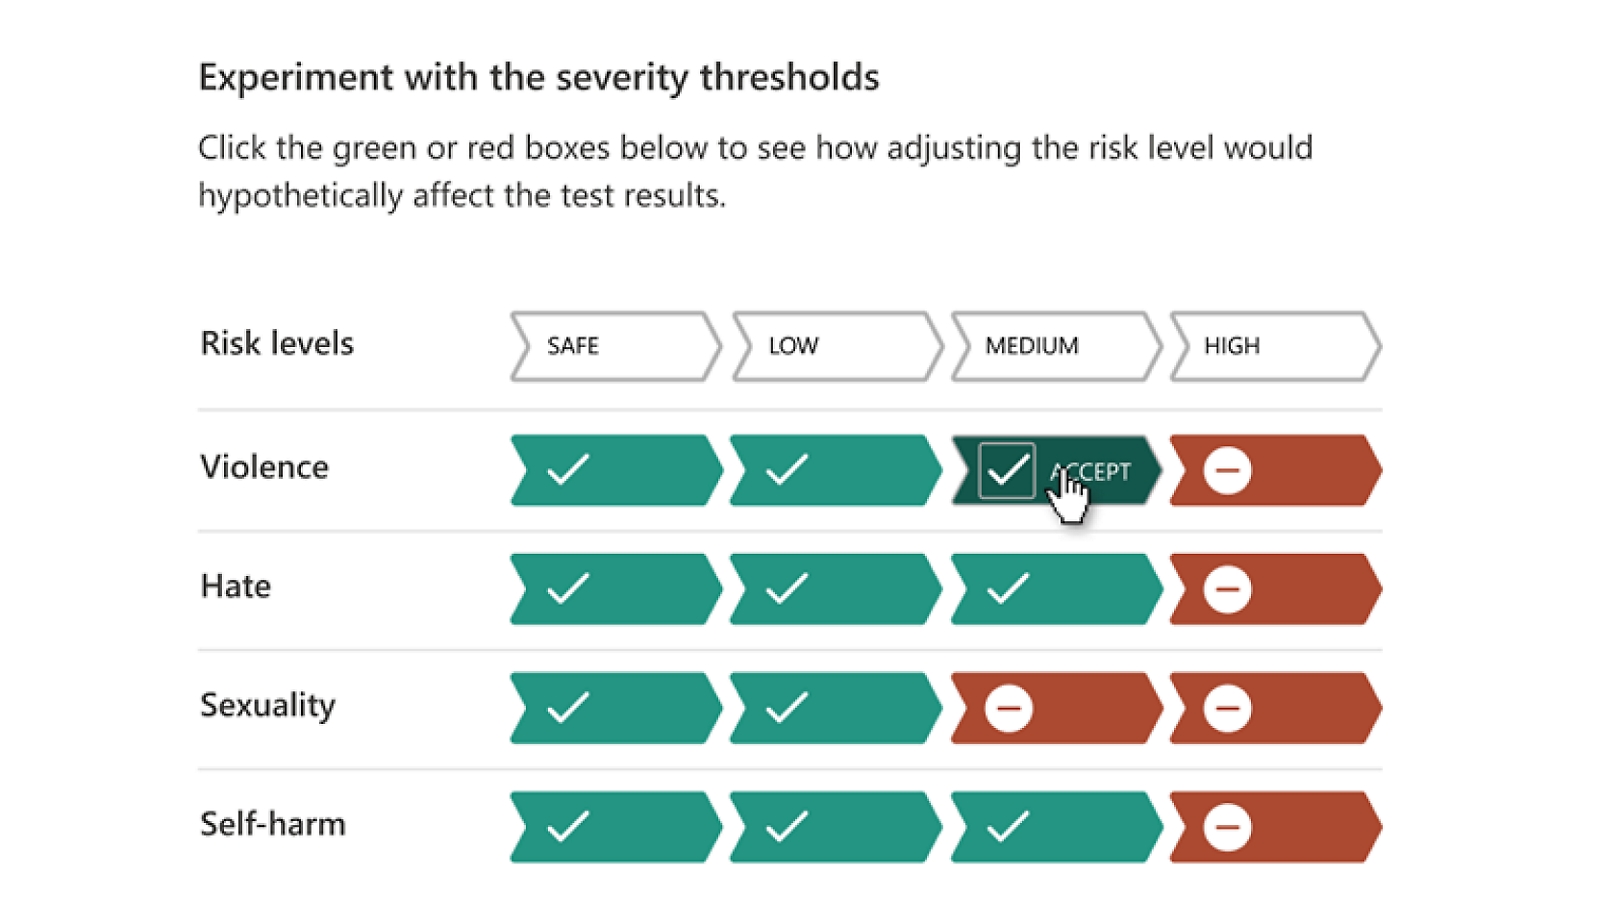 Experiment with the severity thresholds with 5 different levels